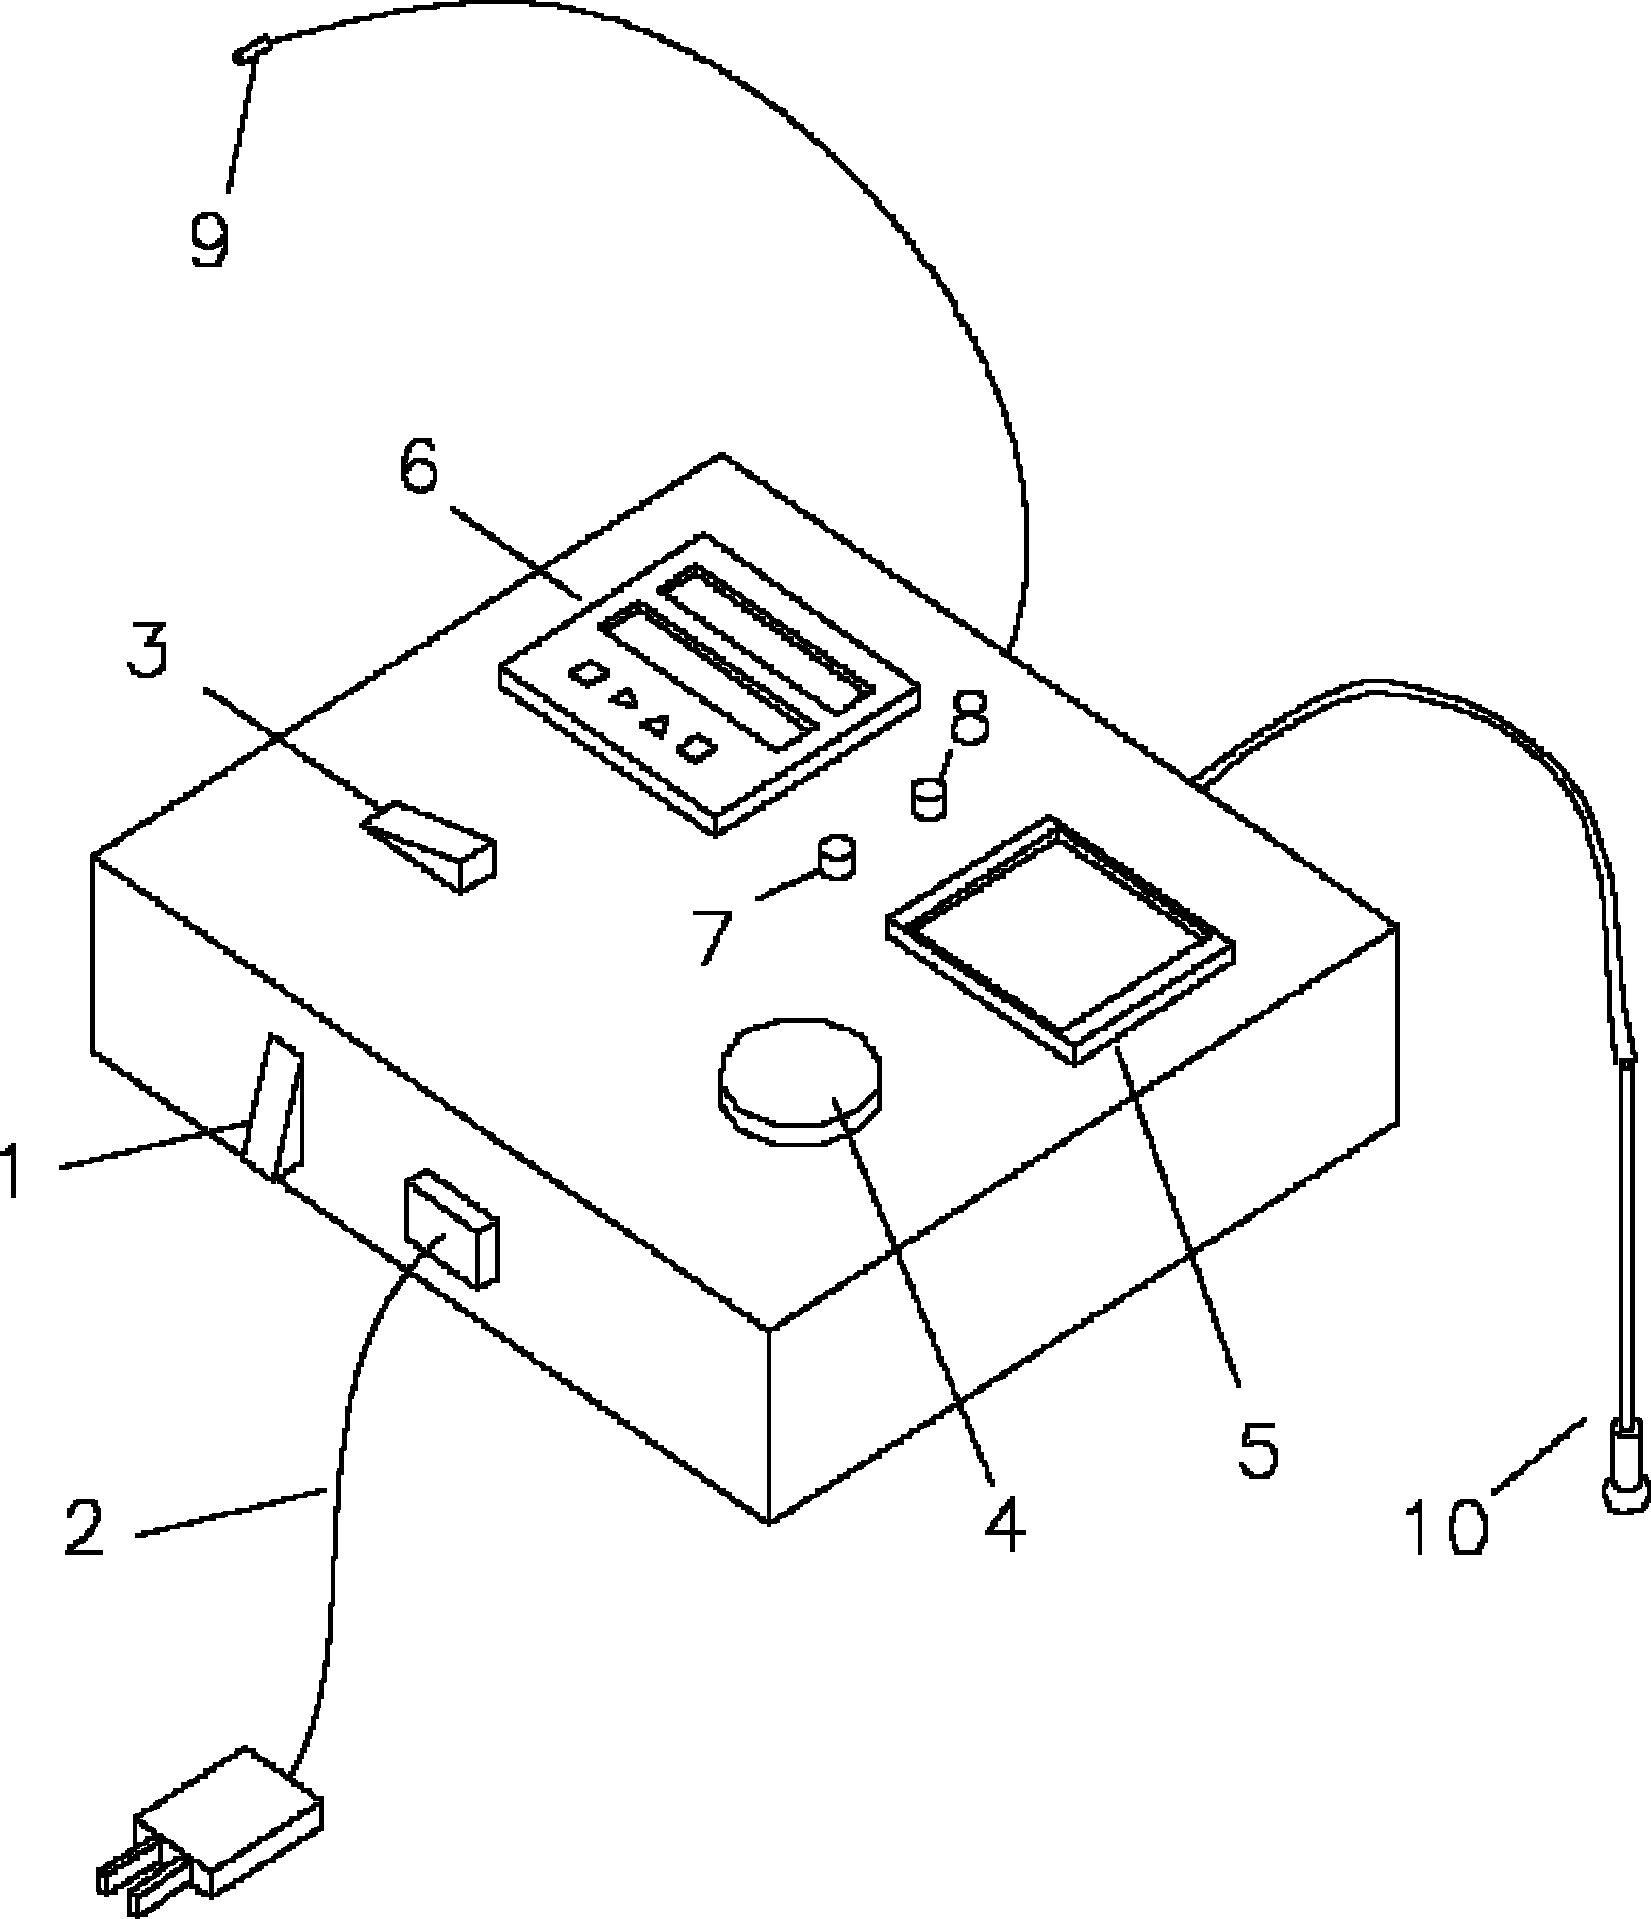 Uniform stirring soil particle suspension device for particle analysis experiment by densimeter method